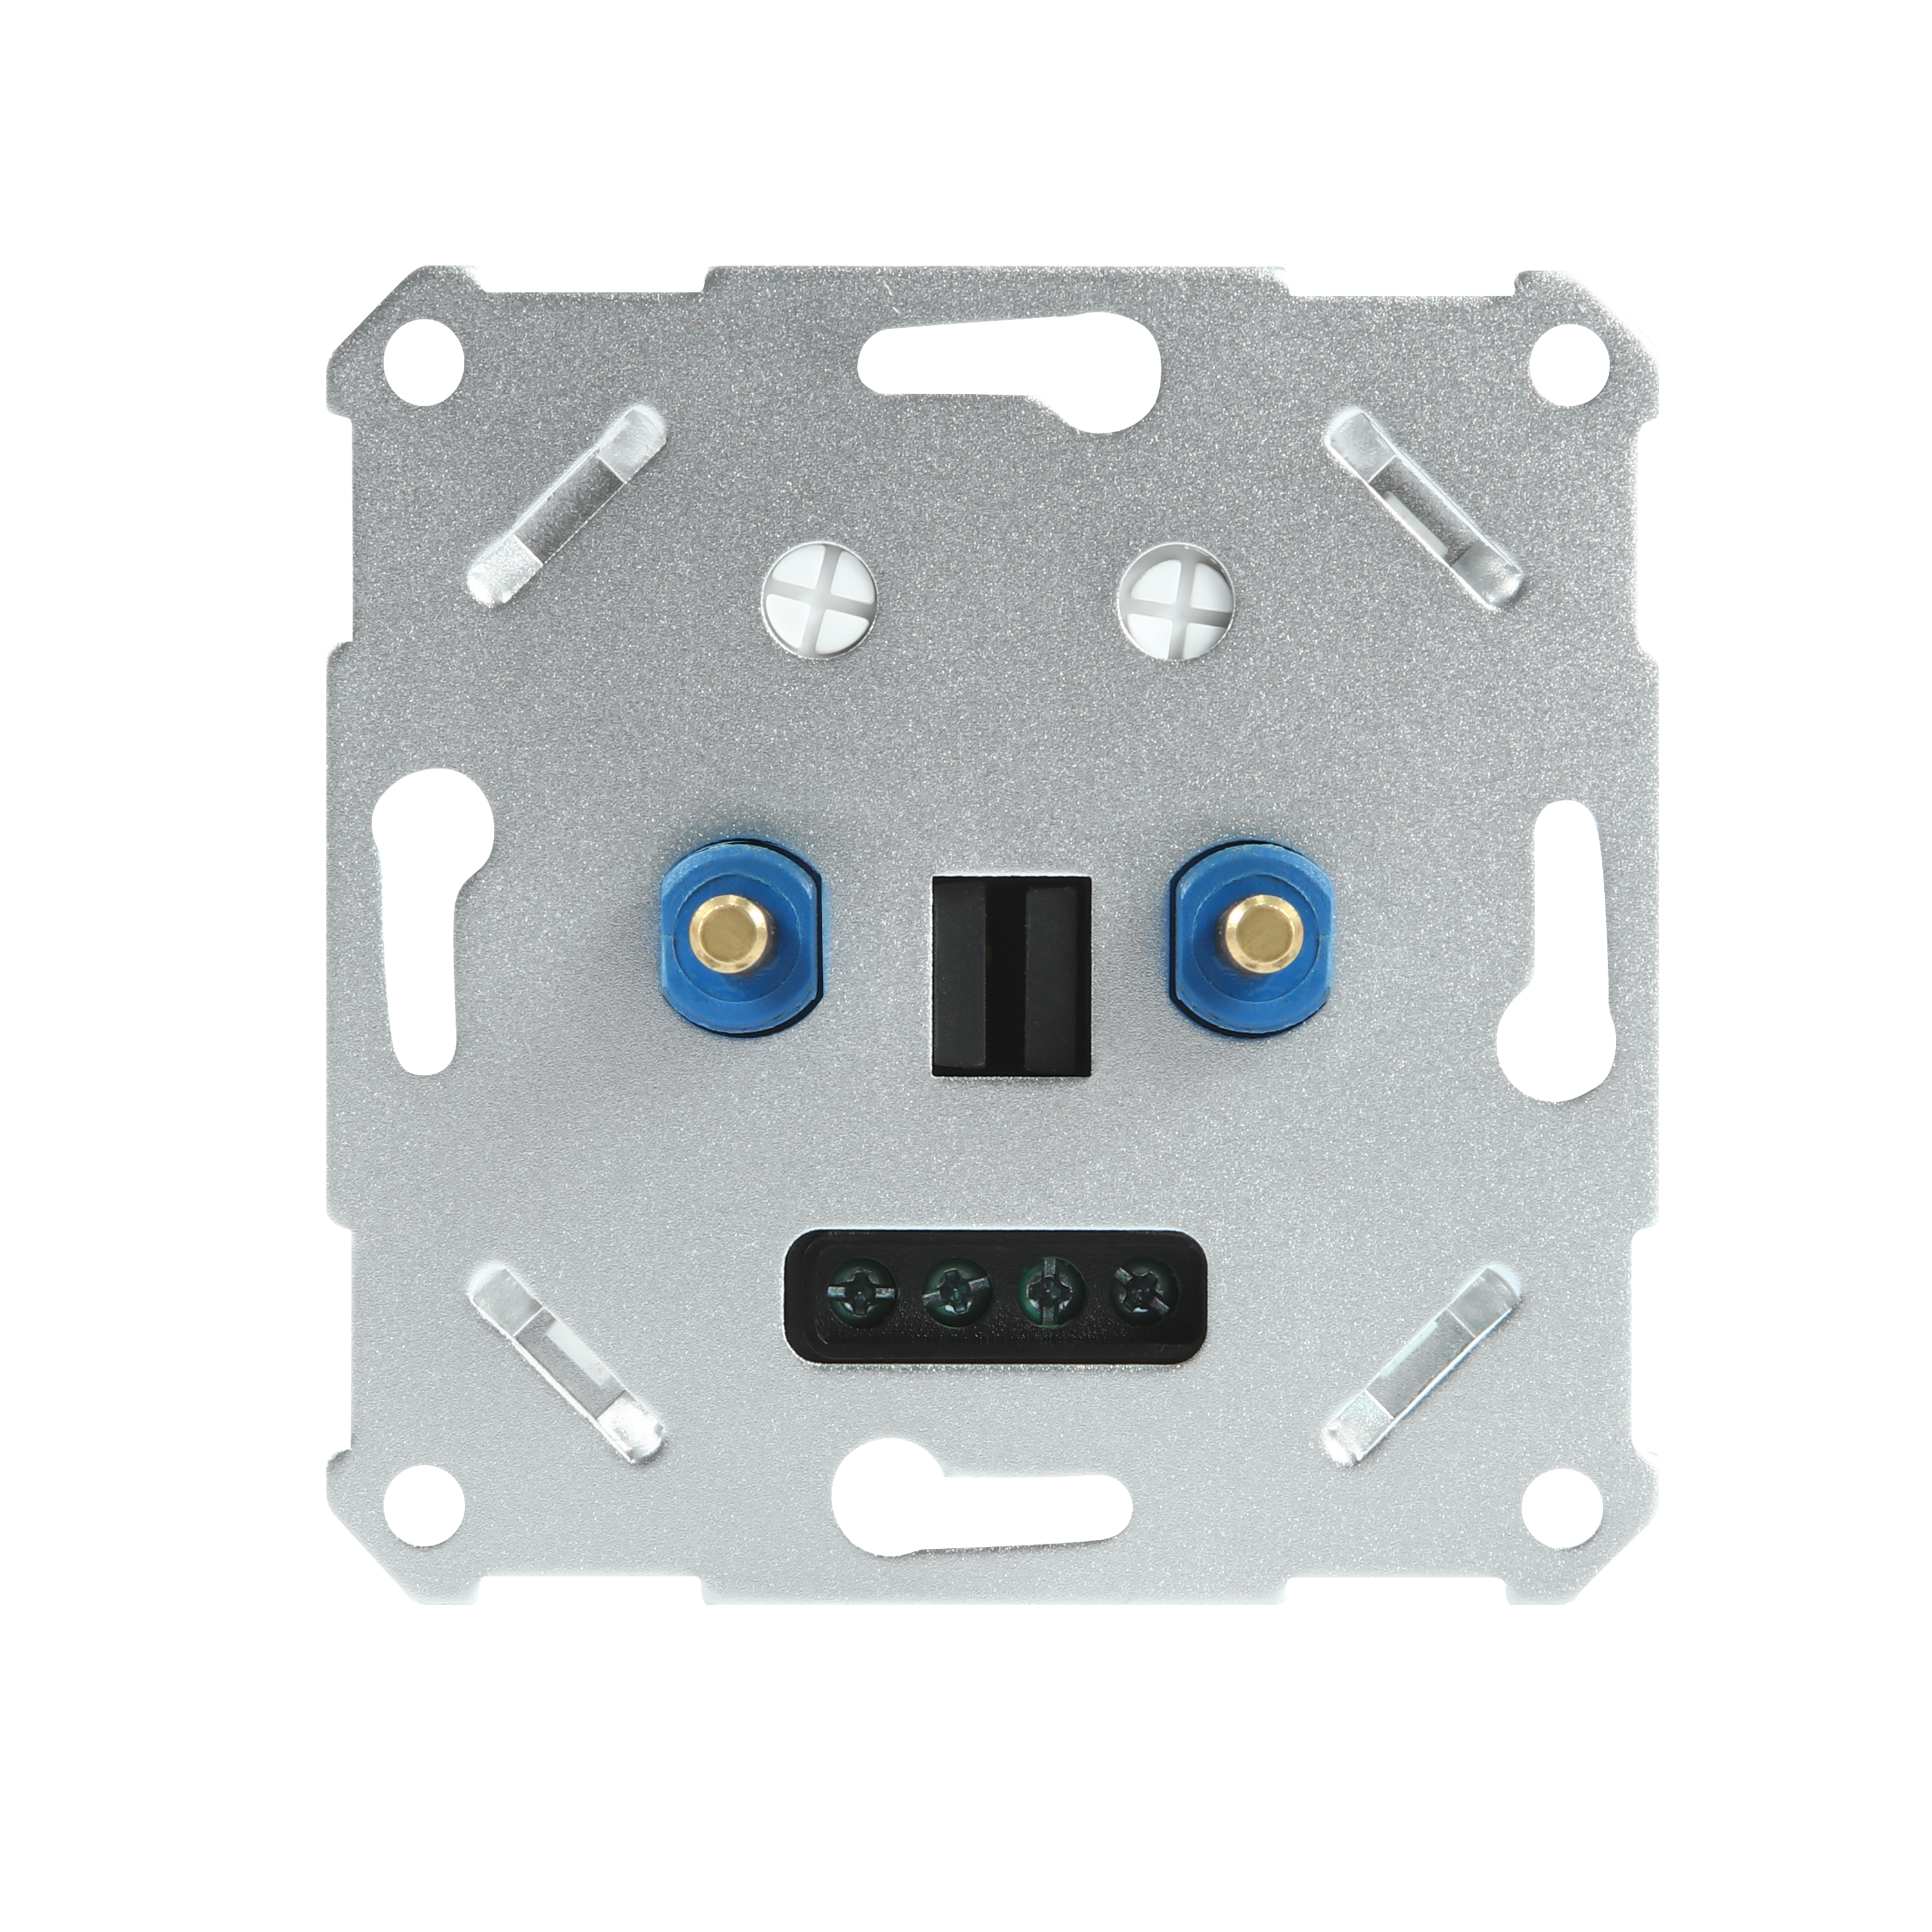 Rotary Wall Dimmer suitable for 200-240V up to 150W